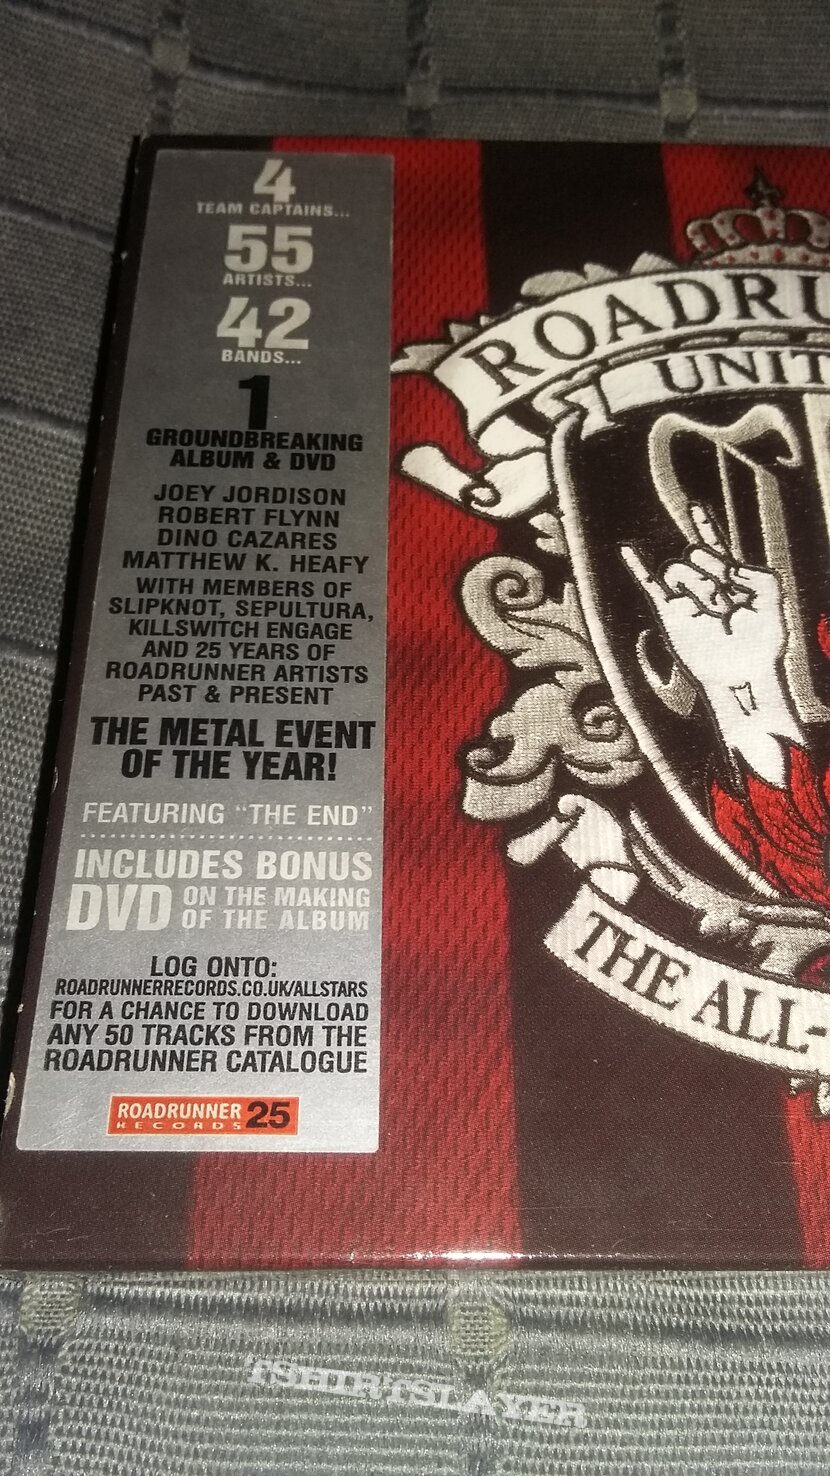 Roadrunner United – The All-Star Sessions CD/DVD | TShirtSlayer TShirt and  BattleJacket Gallery